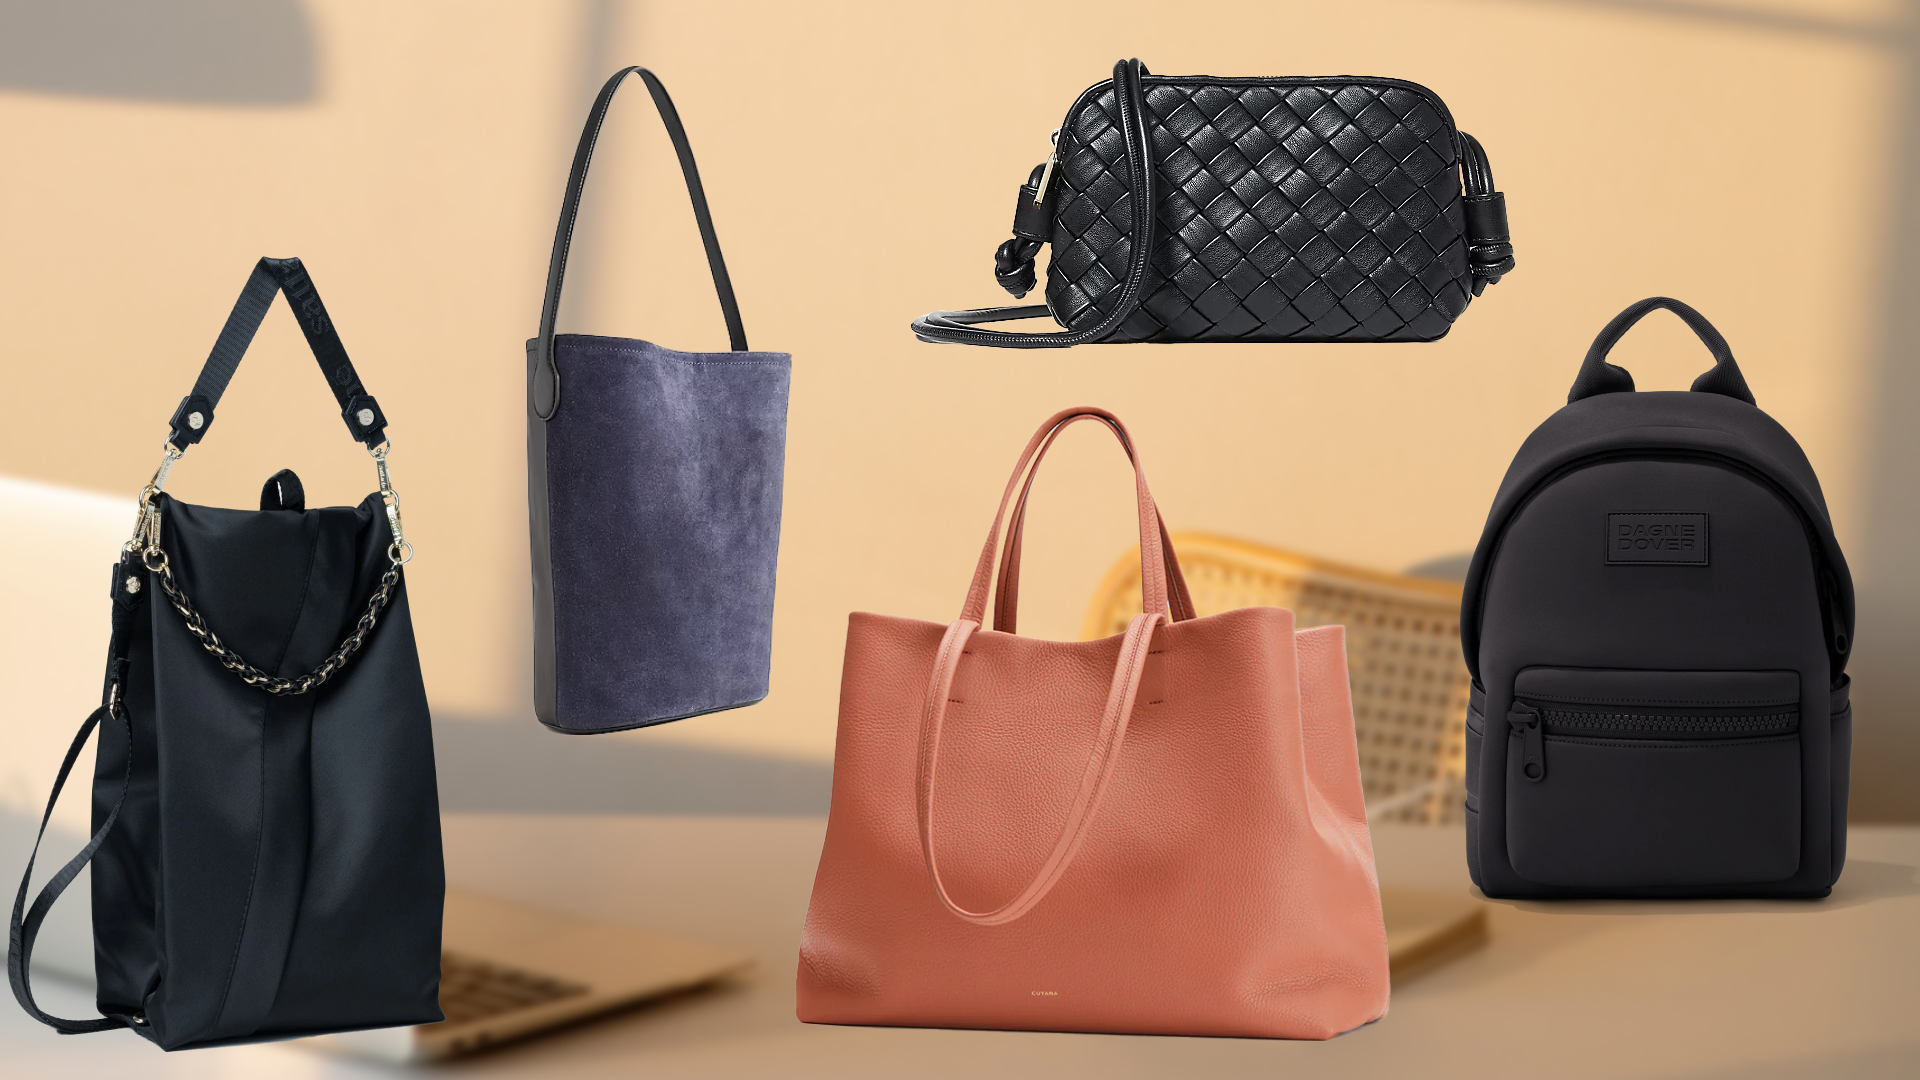 Tote vs. Shoulder Bag: What's The Difference?